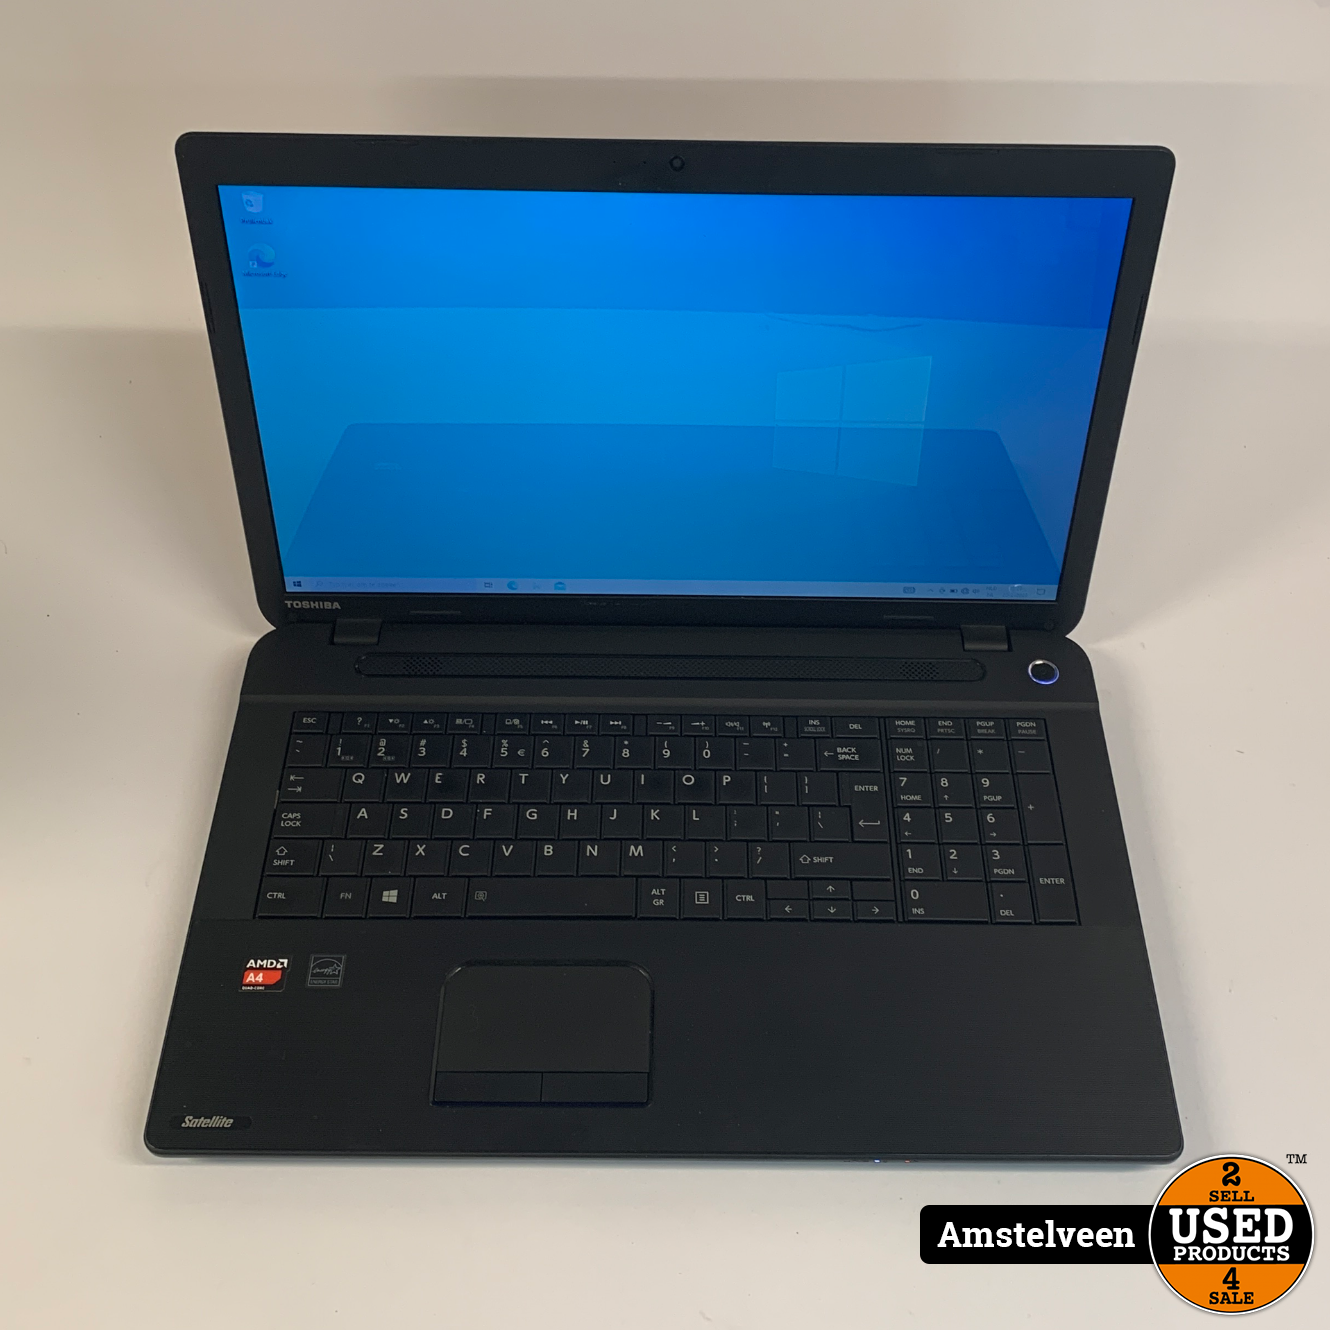 Satellite 17-inch Laptop | 4GB 230GB | Nette Staat - Used Products Amstelveen